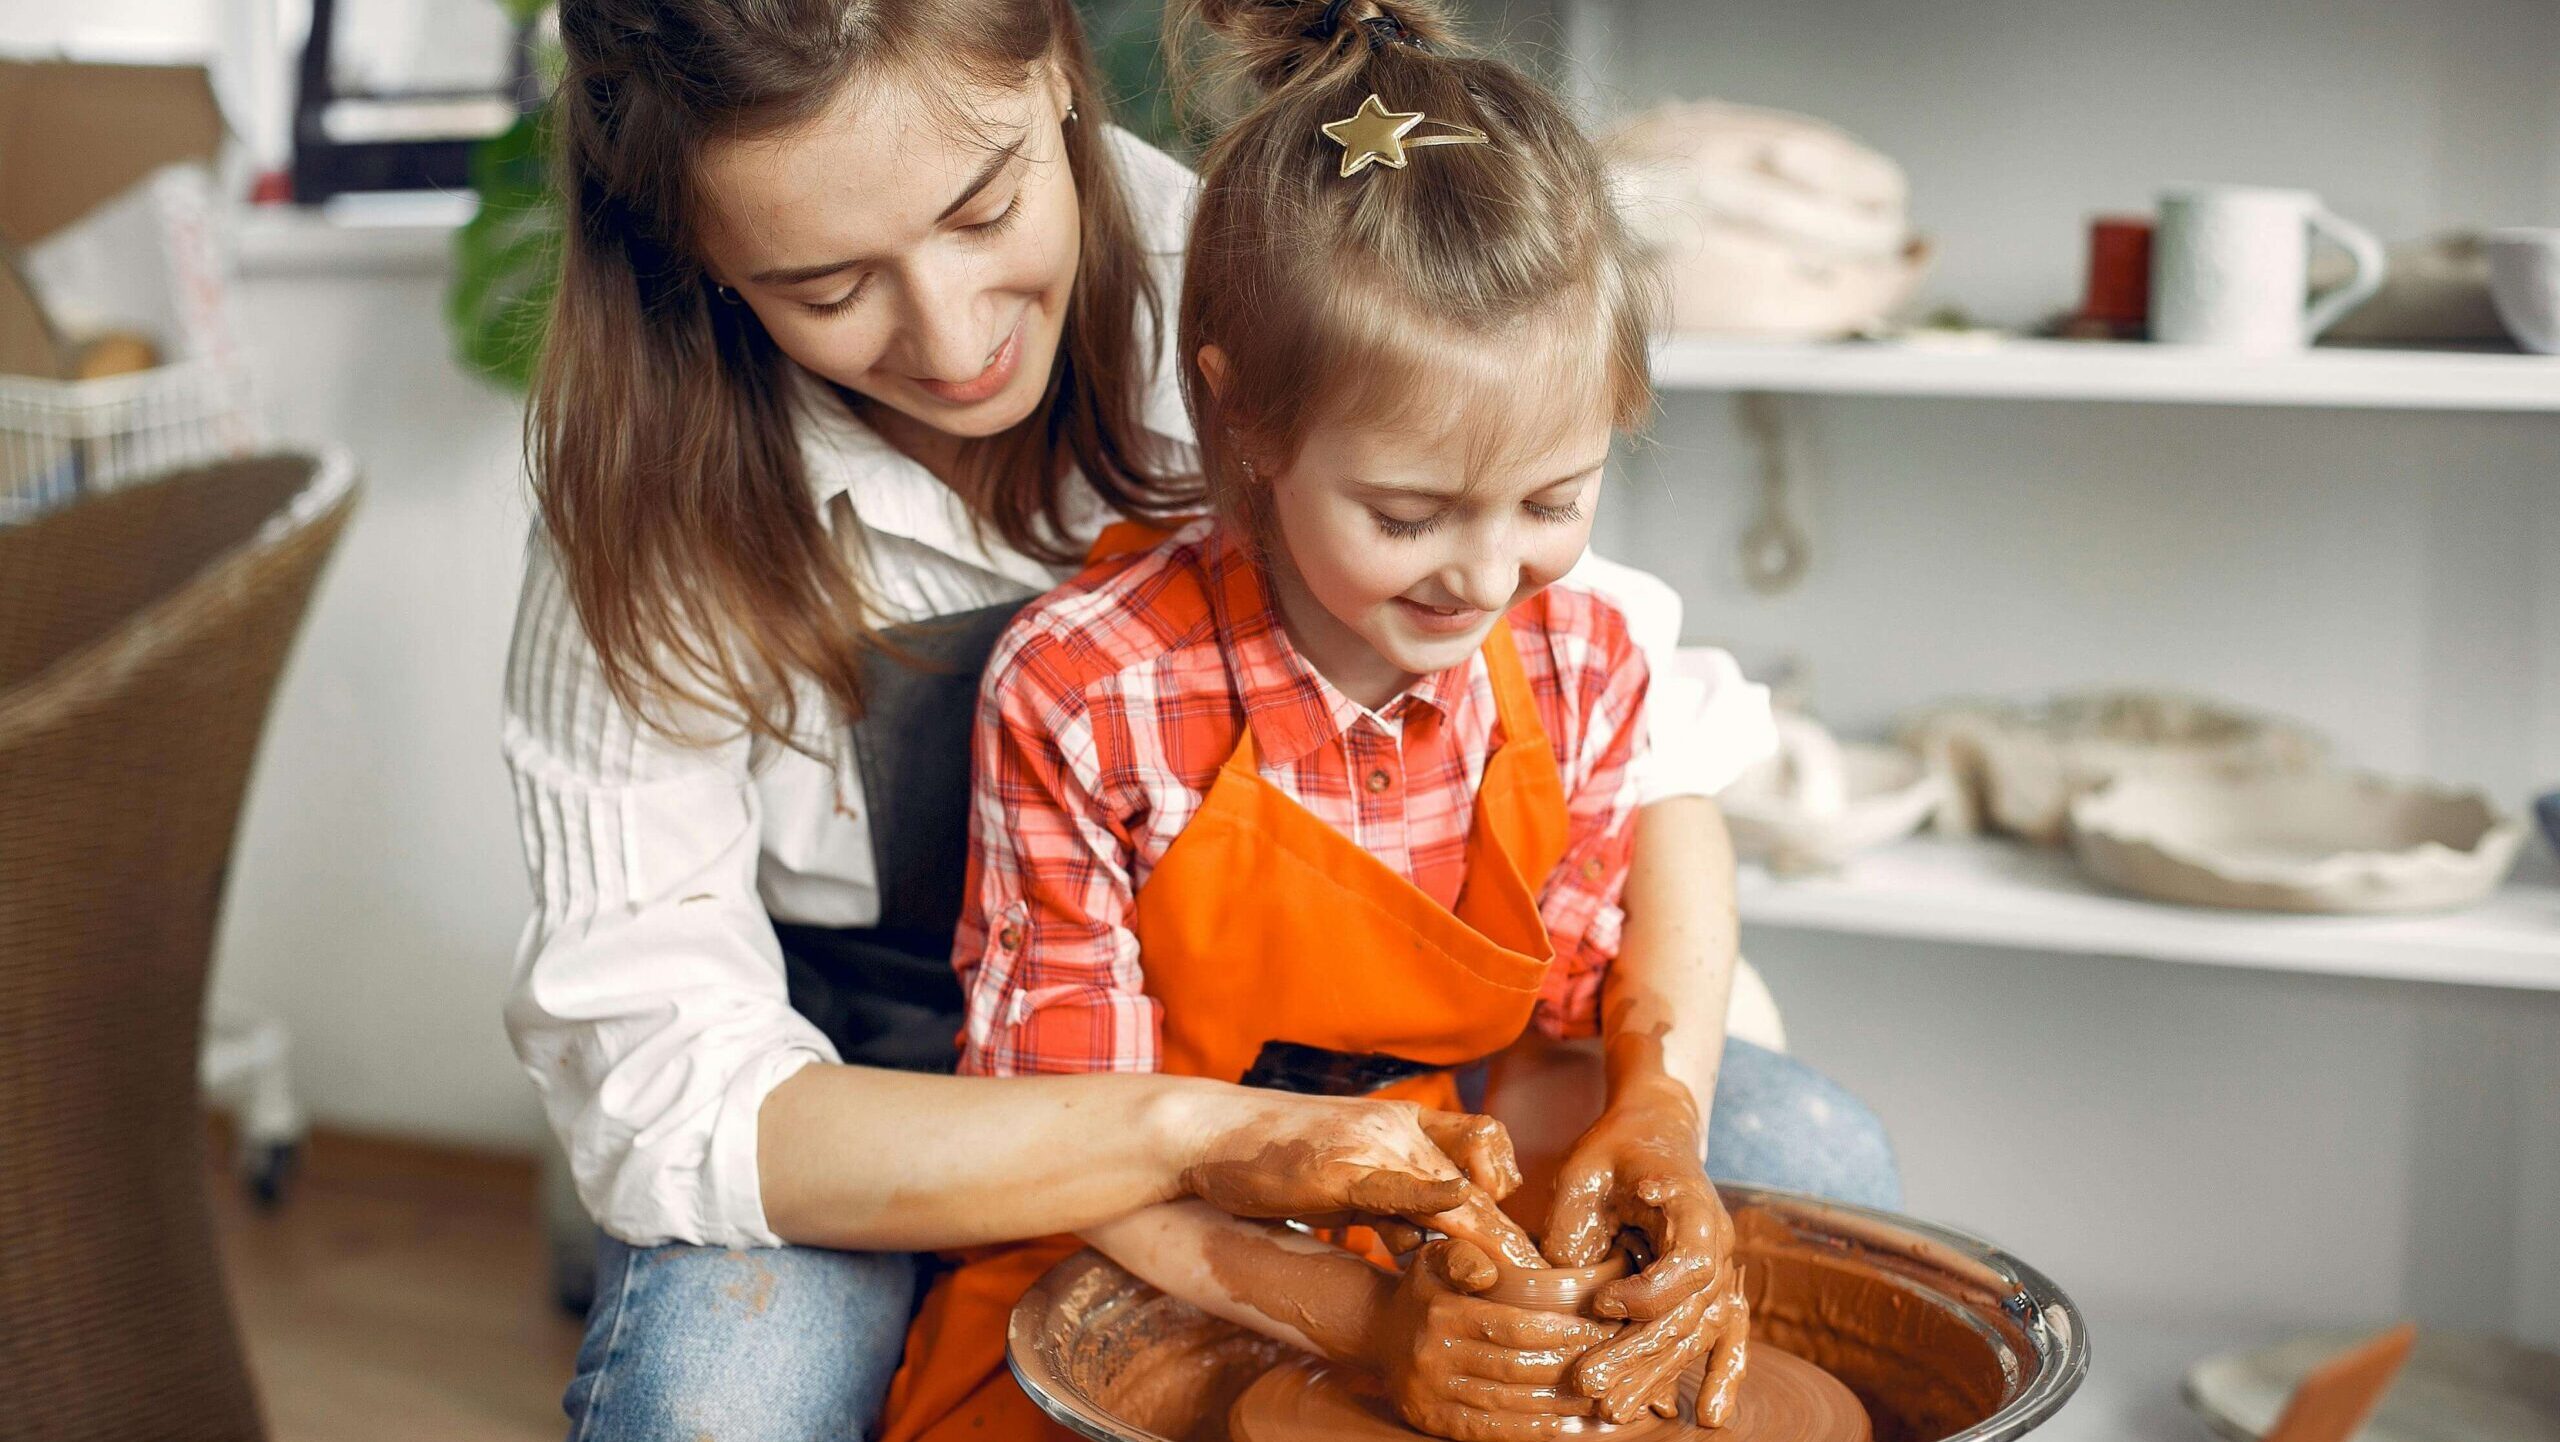 Pottery Kit for Kids: Unleash Their Creativity and Artistic Potential